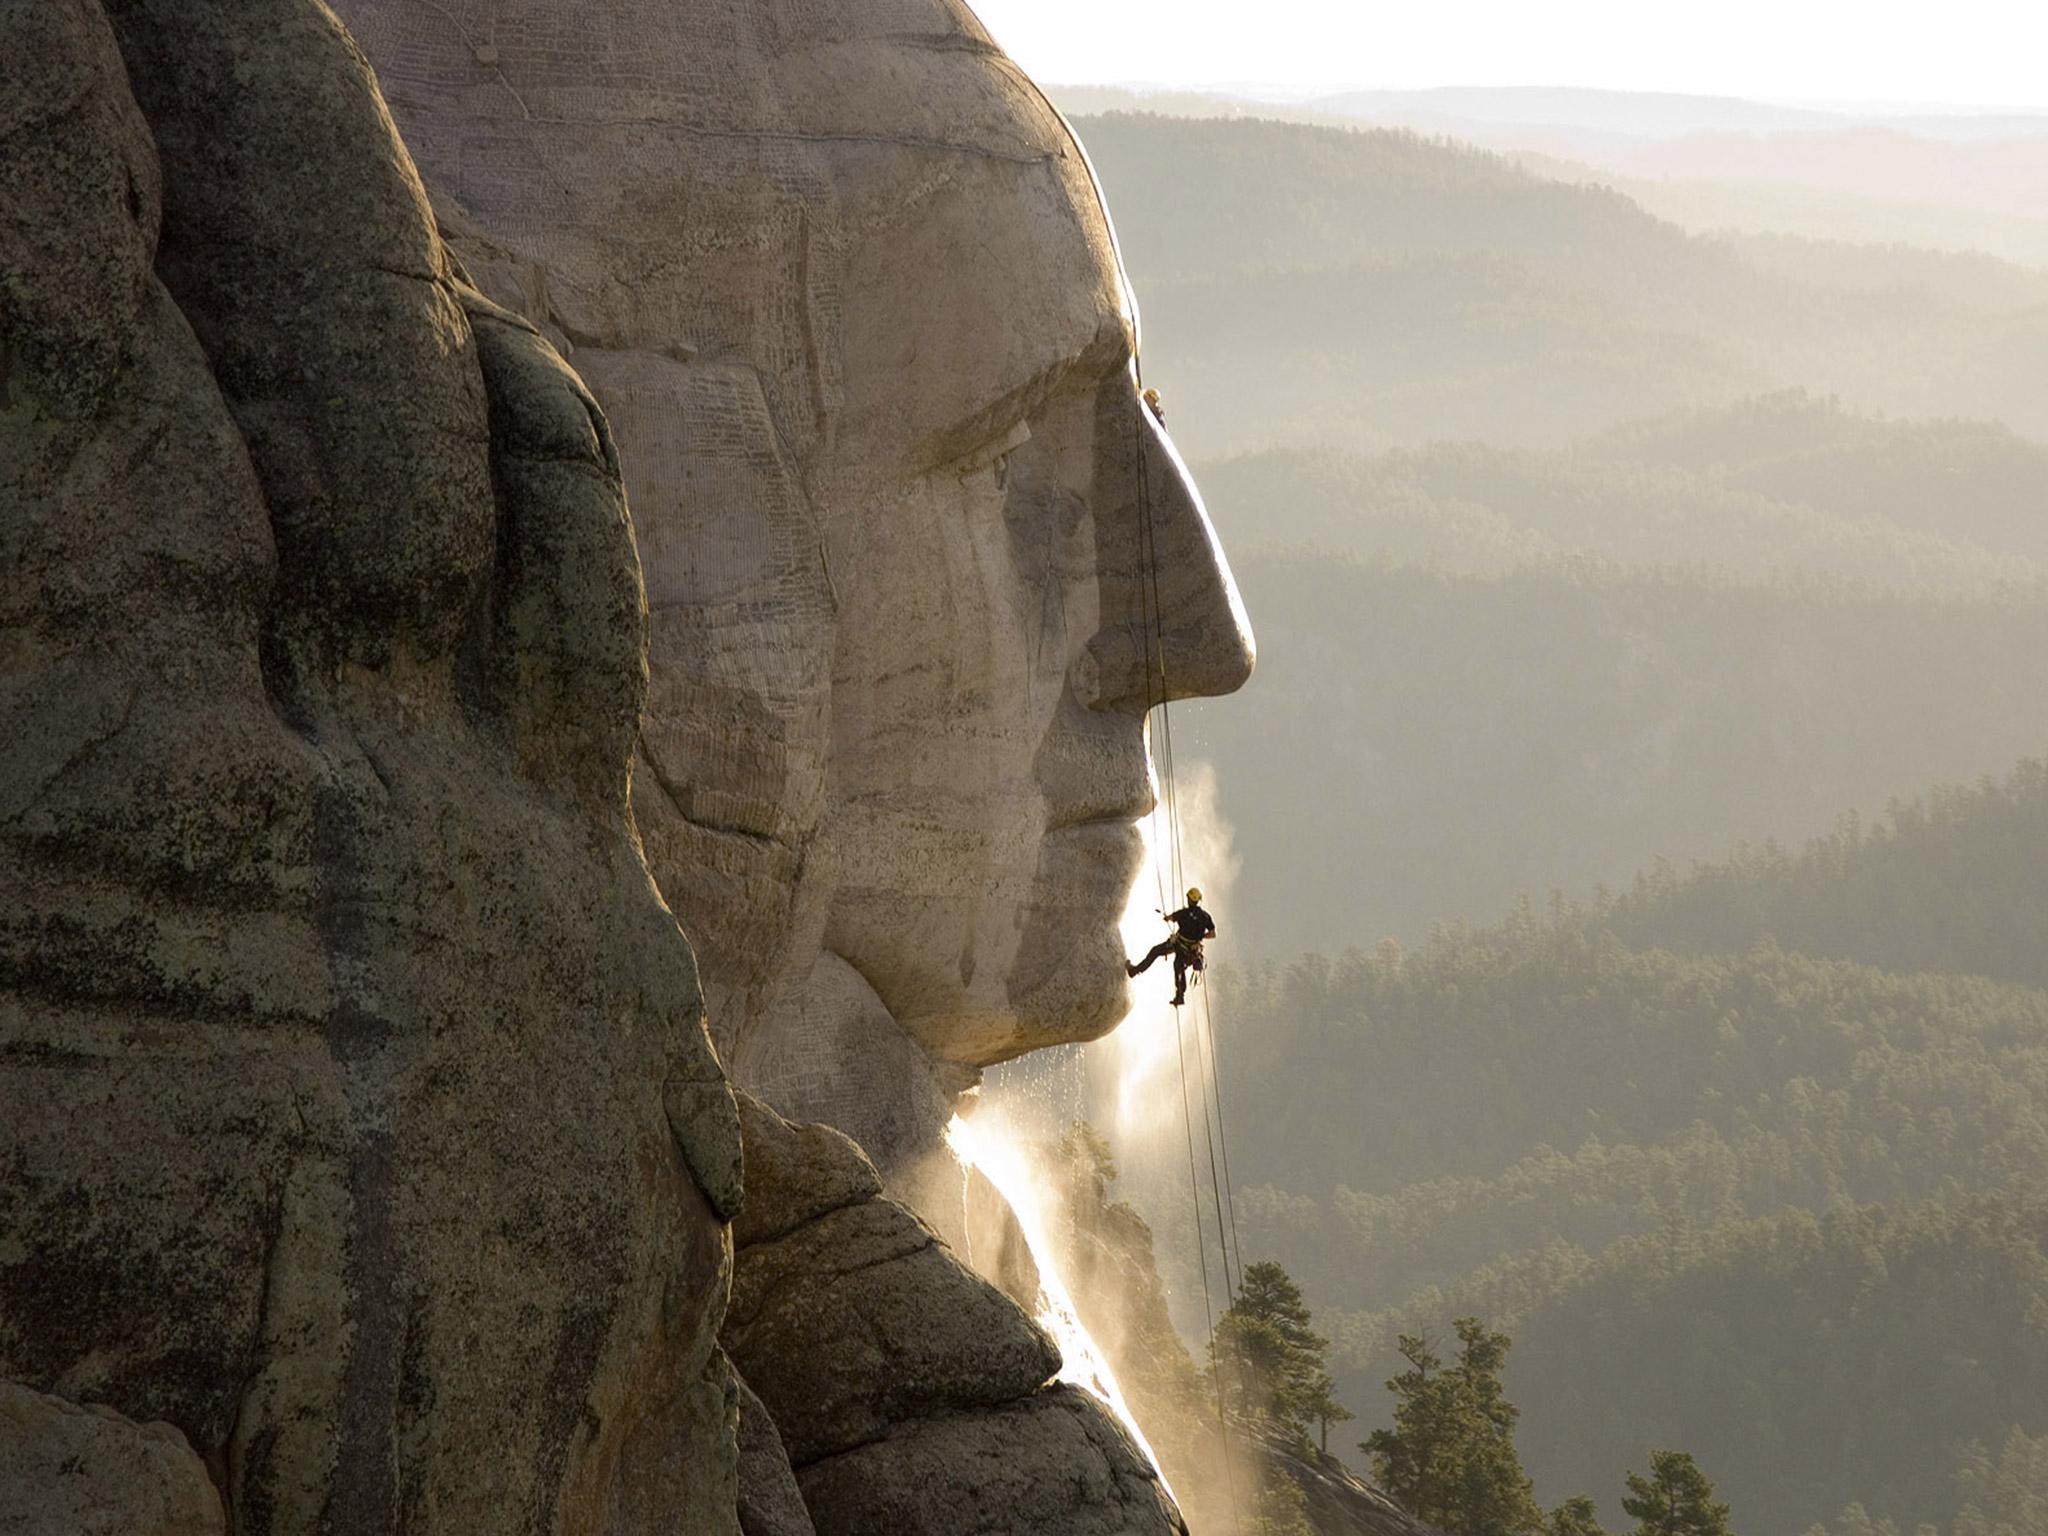 Mount Rushmore is among the famous sites that Thorsten Möwes has scaled